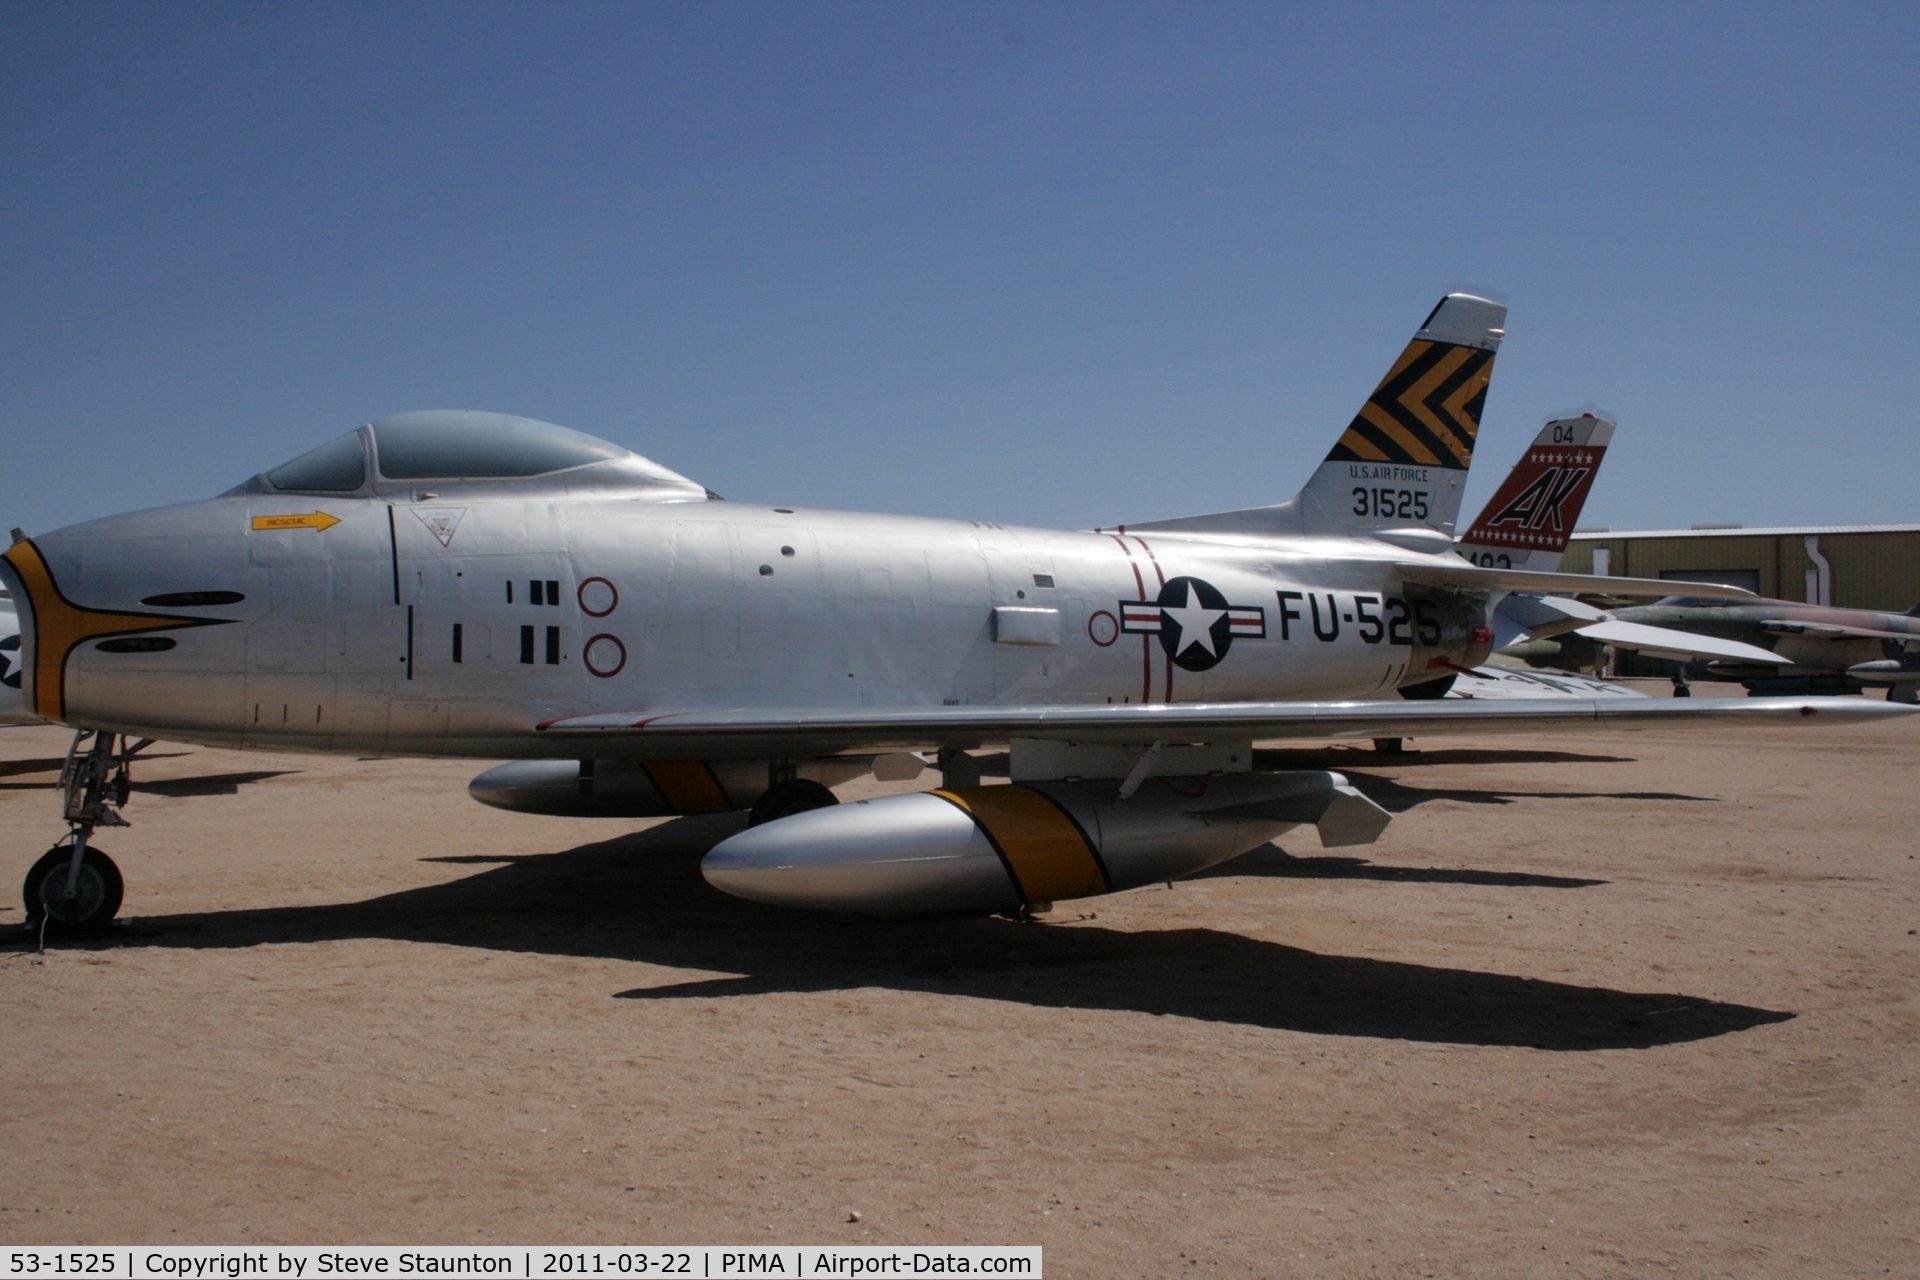 53-1525, 1953 North American F-86H Sabre C/N 203-297, Taken at Pima Air and Space Museum, in March 2011 whilst on an Aeroprint Aviation tour